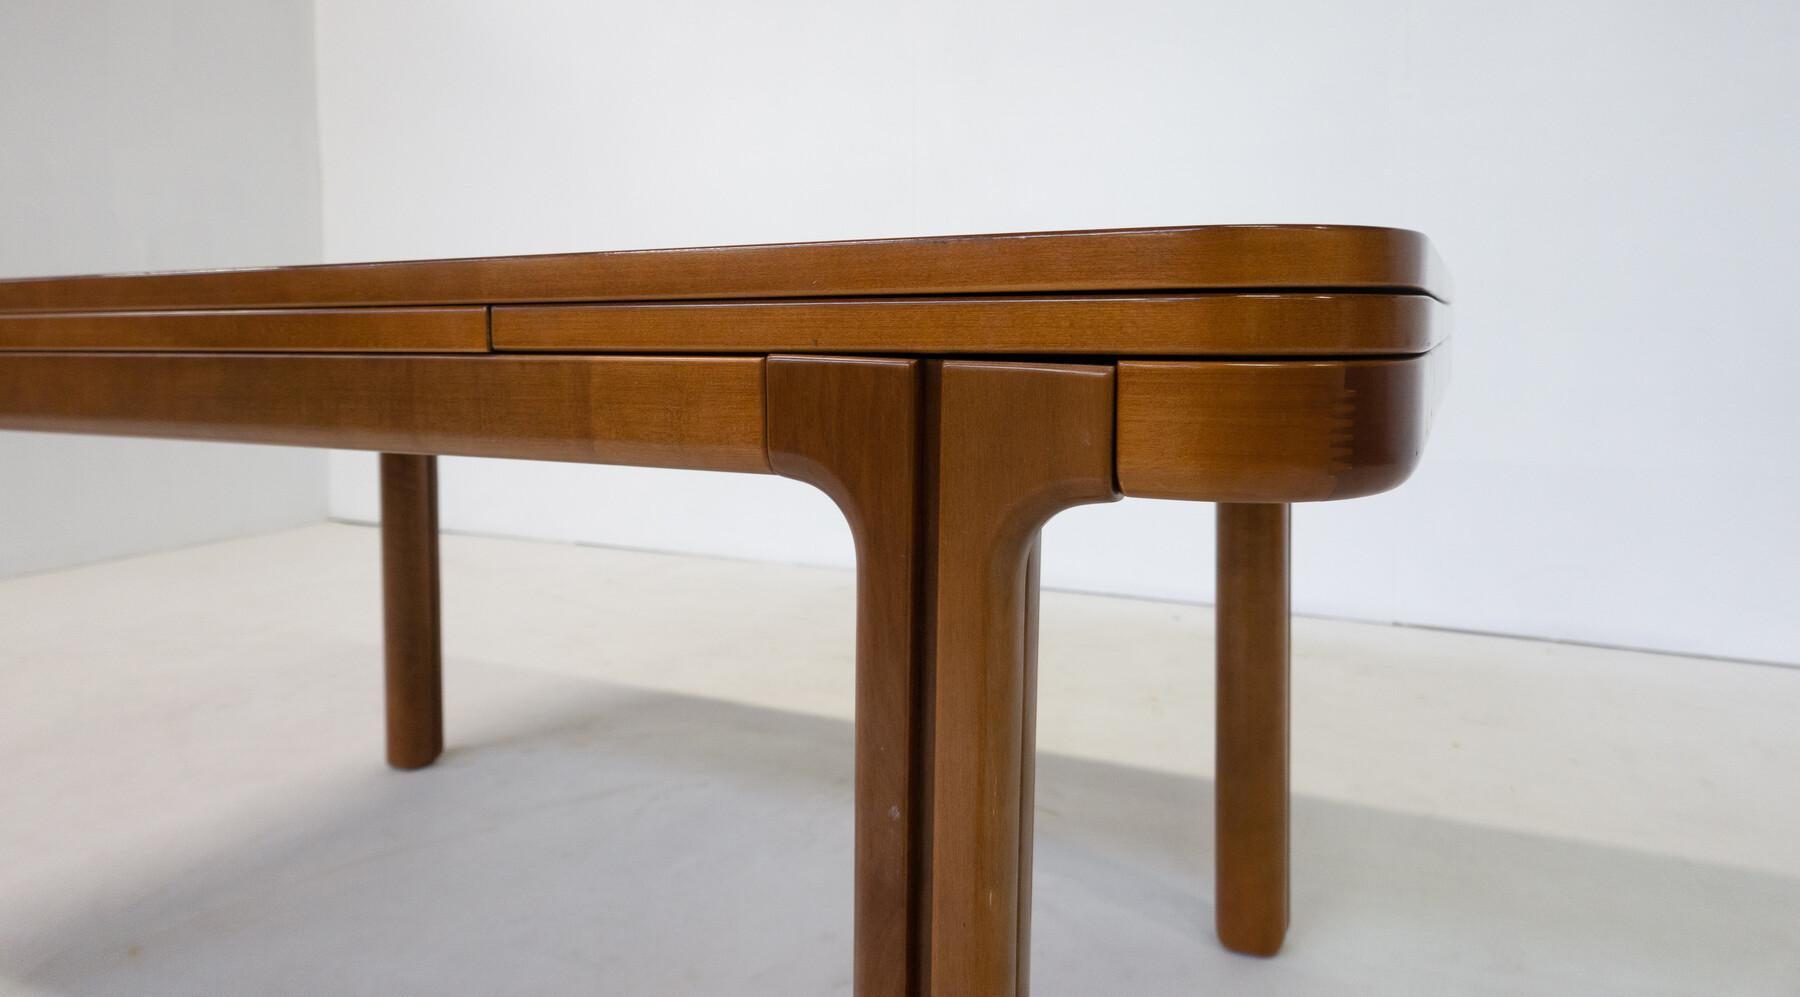 Mid-Century Modern Extendable Dining Table by Llmari Tapiovaara, Finland, 1950s For Sale 1